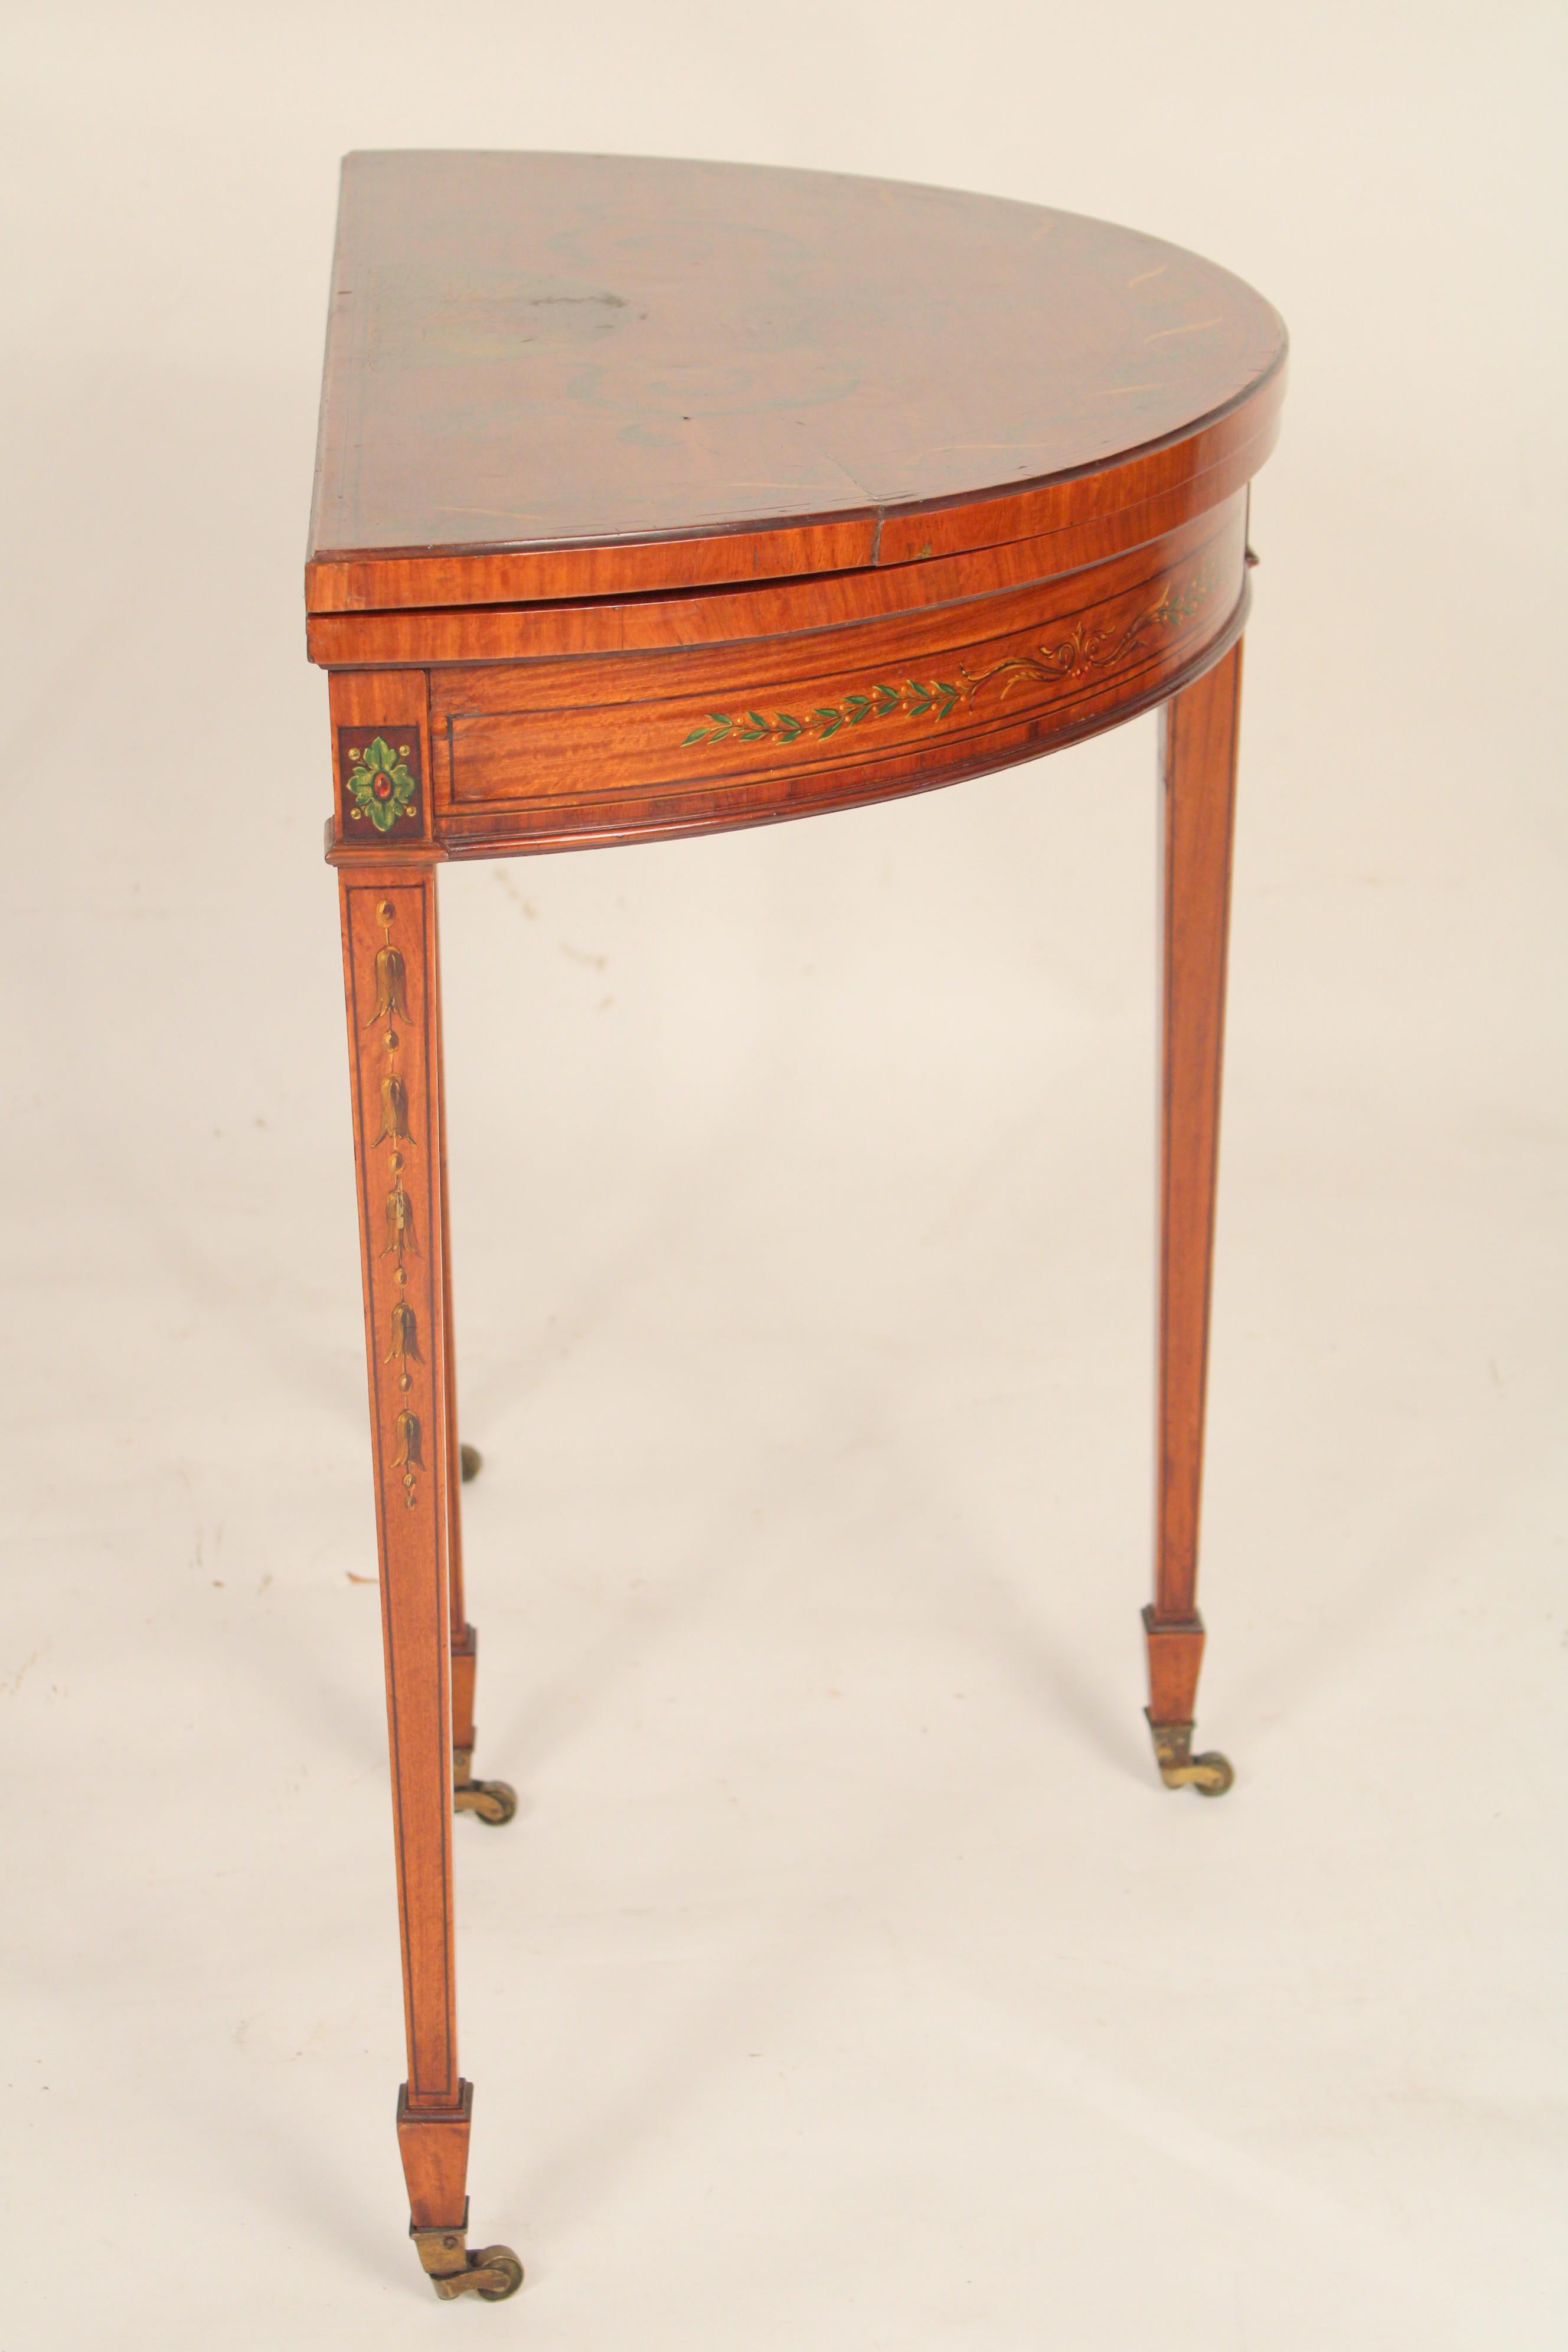 English Edwardian Painted Satin Wood Games Table In Good Condition For Sale In Laguna Beach, CA